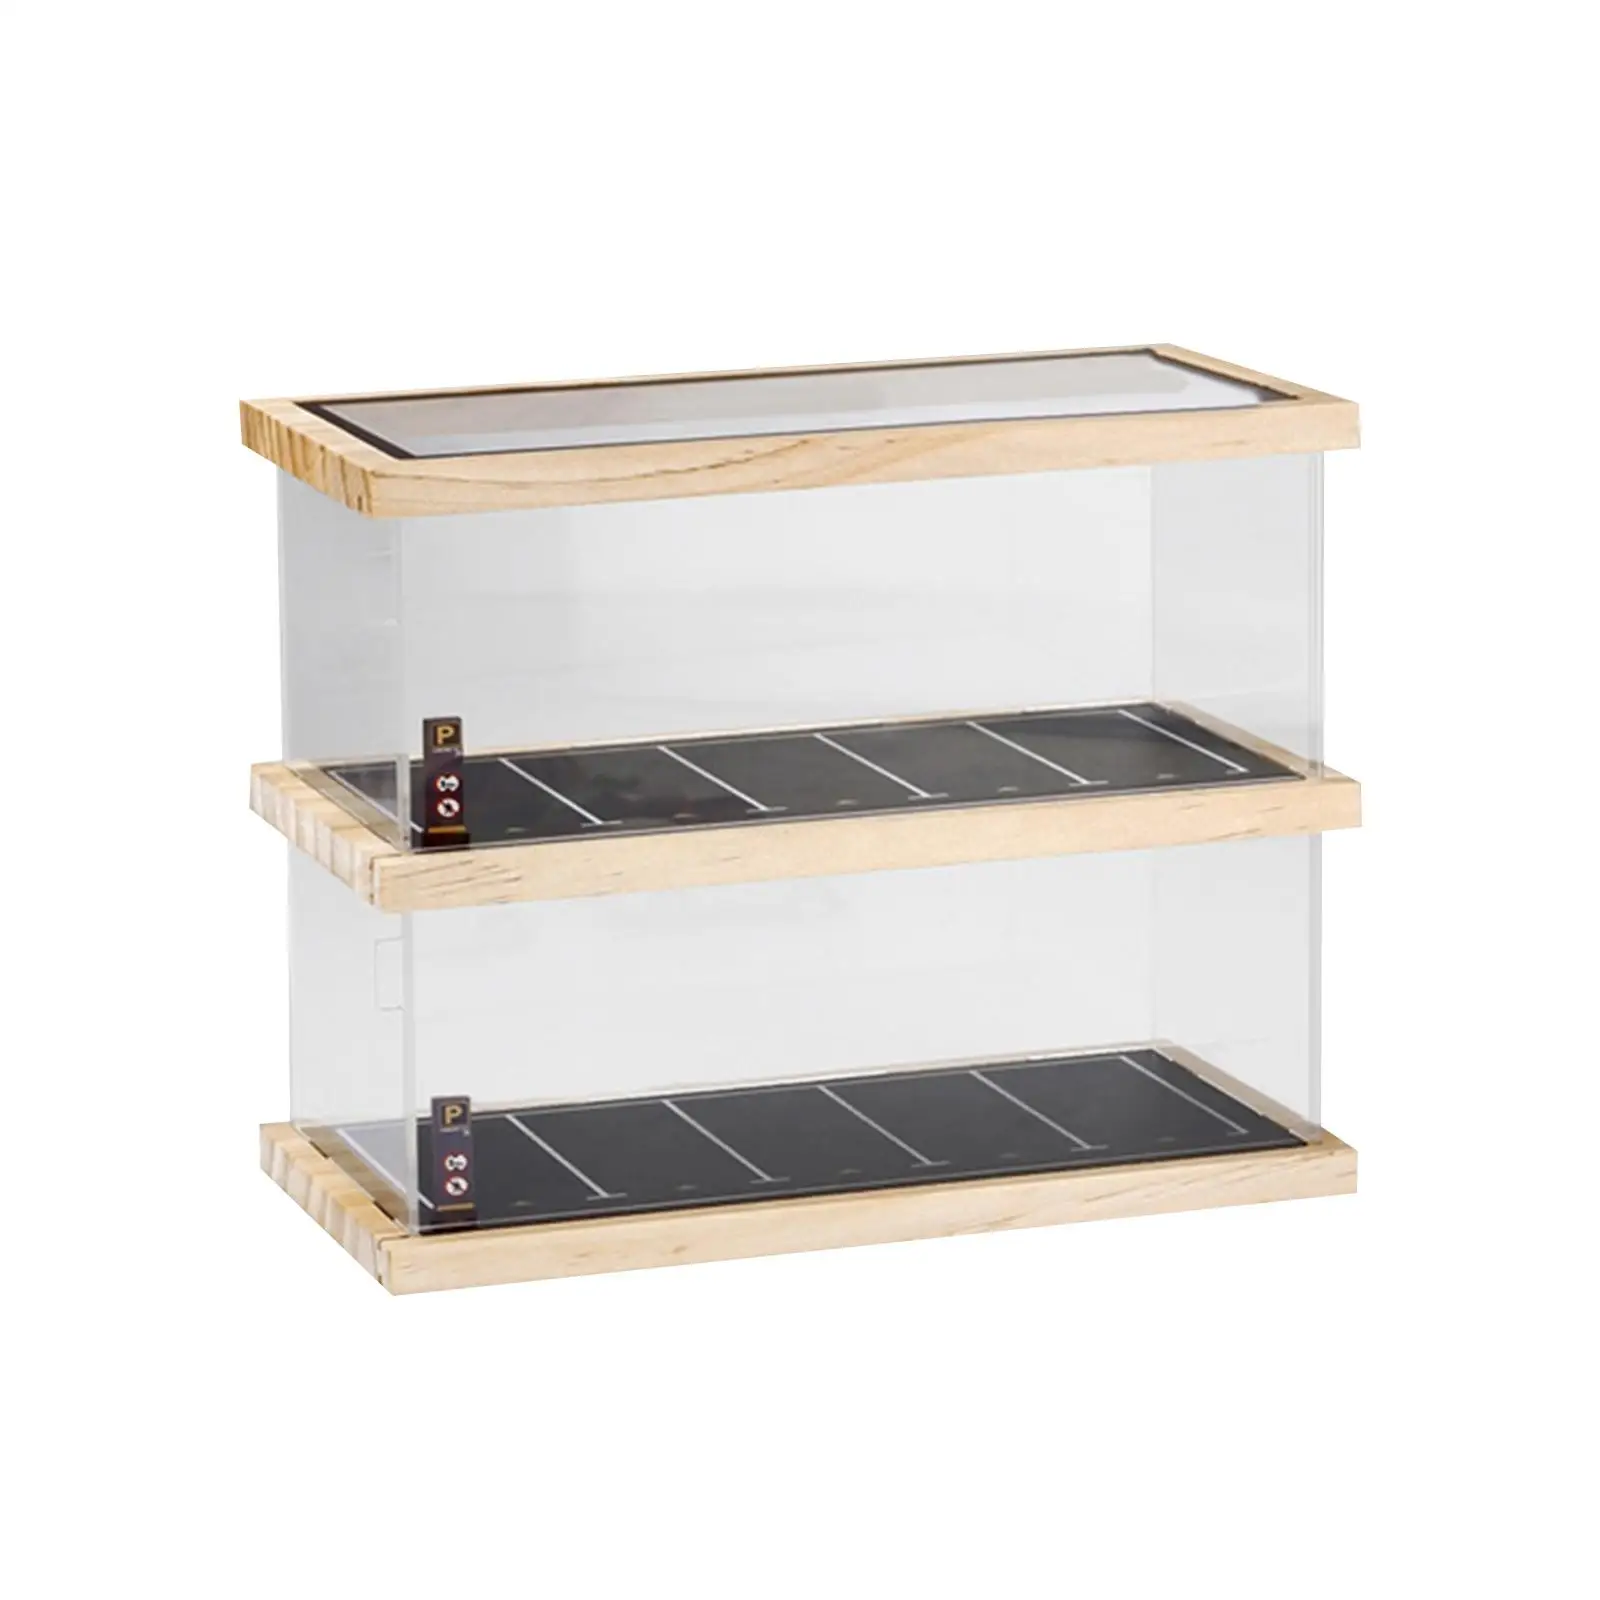 1:64 Parking Lot Acrylic Storage Organizer Decoration Display Case for Office Desk Collectibles Bookshelf Countertop Study